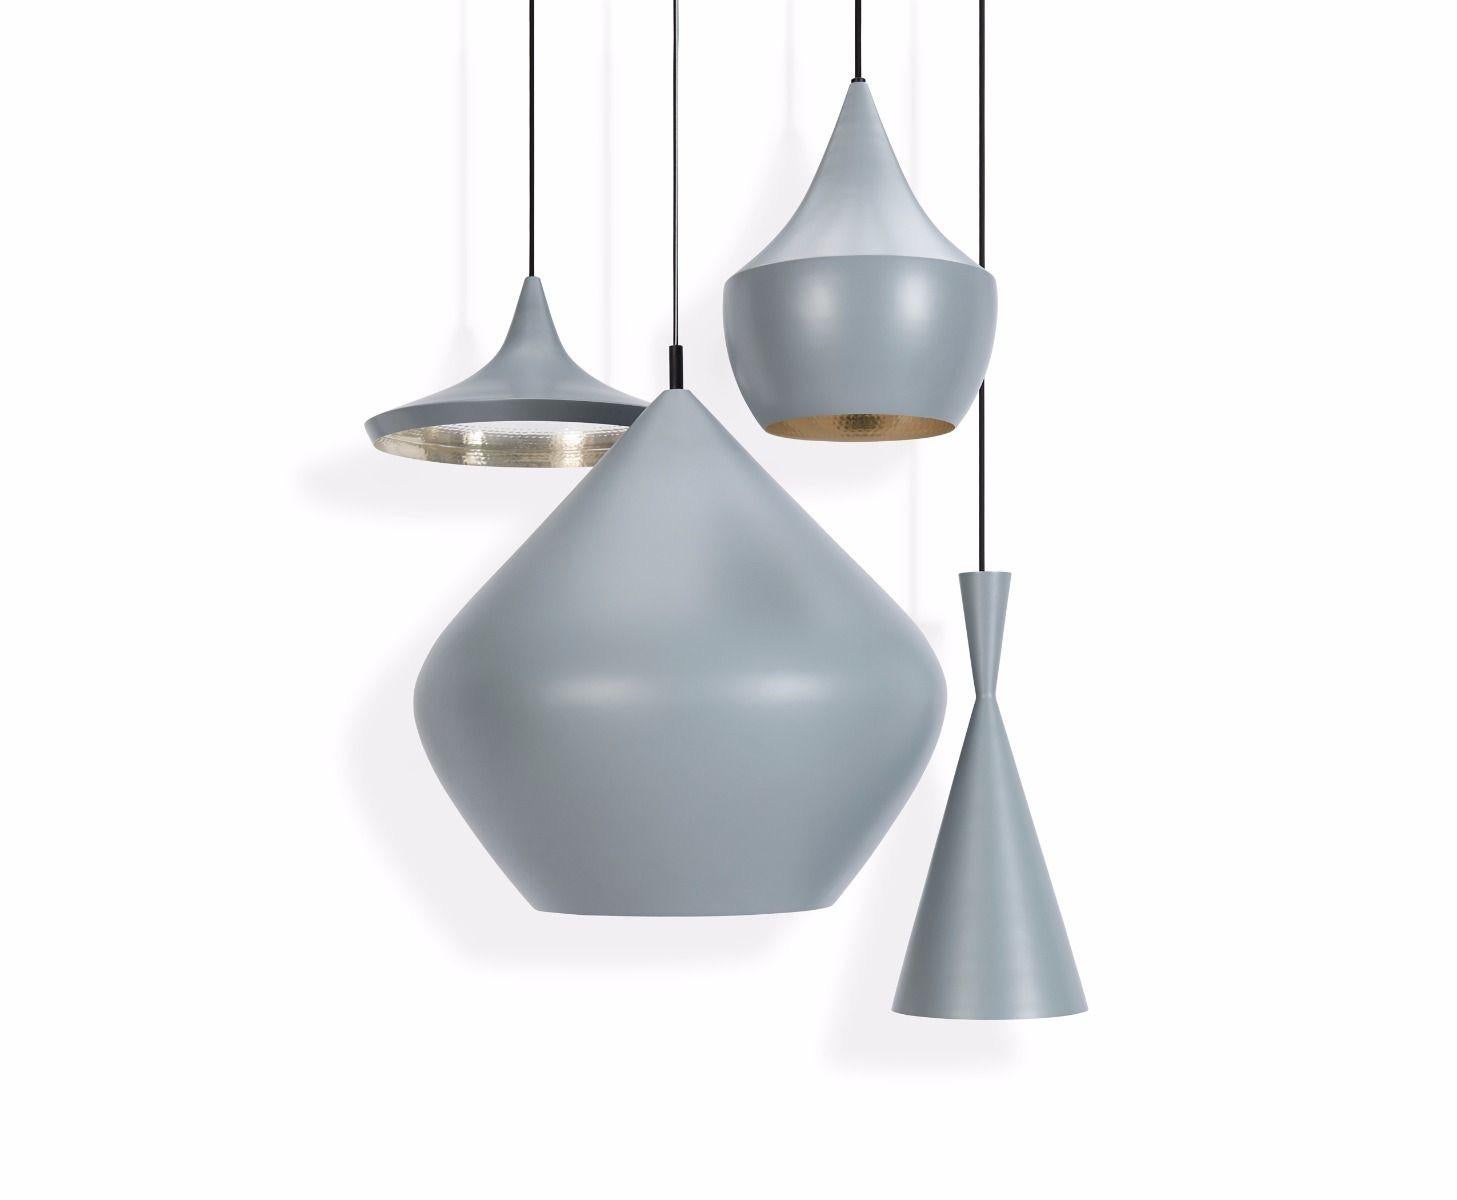 Minimal Tom Dixon beat tall gray pendant brass light fixture, contemporary. Gorgeous piece. Retails for 575 USD. New in box, never installed.

Perpetuating the skills of artisan craftsmen in Northern India, Beat’s origin is a re-purposed water